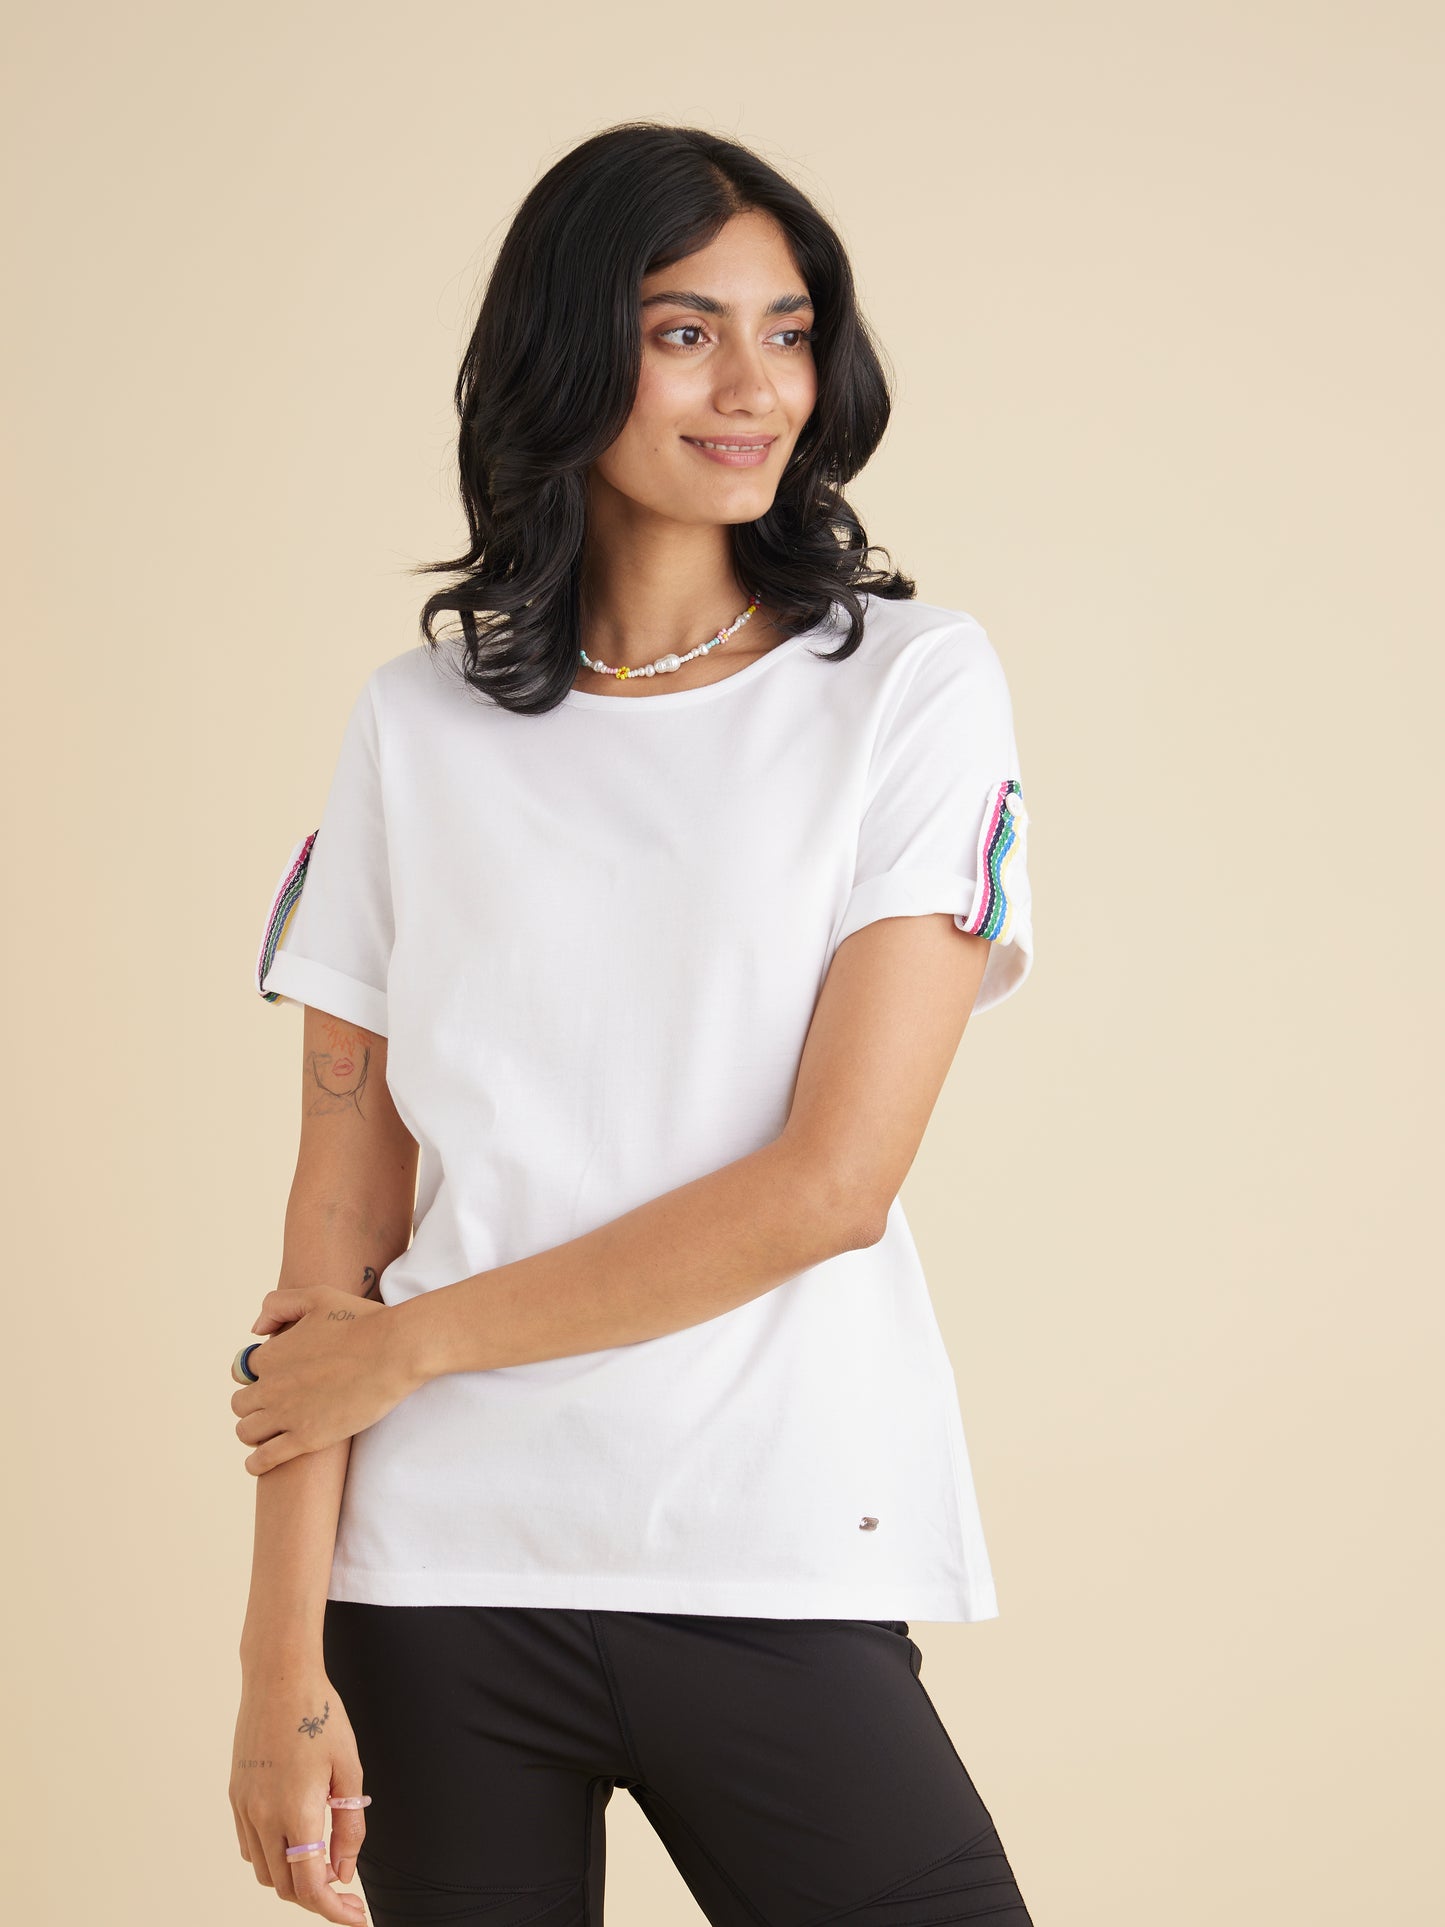 The Aouatil Top White